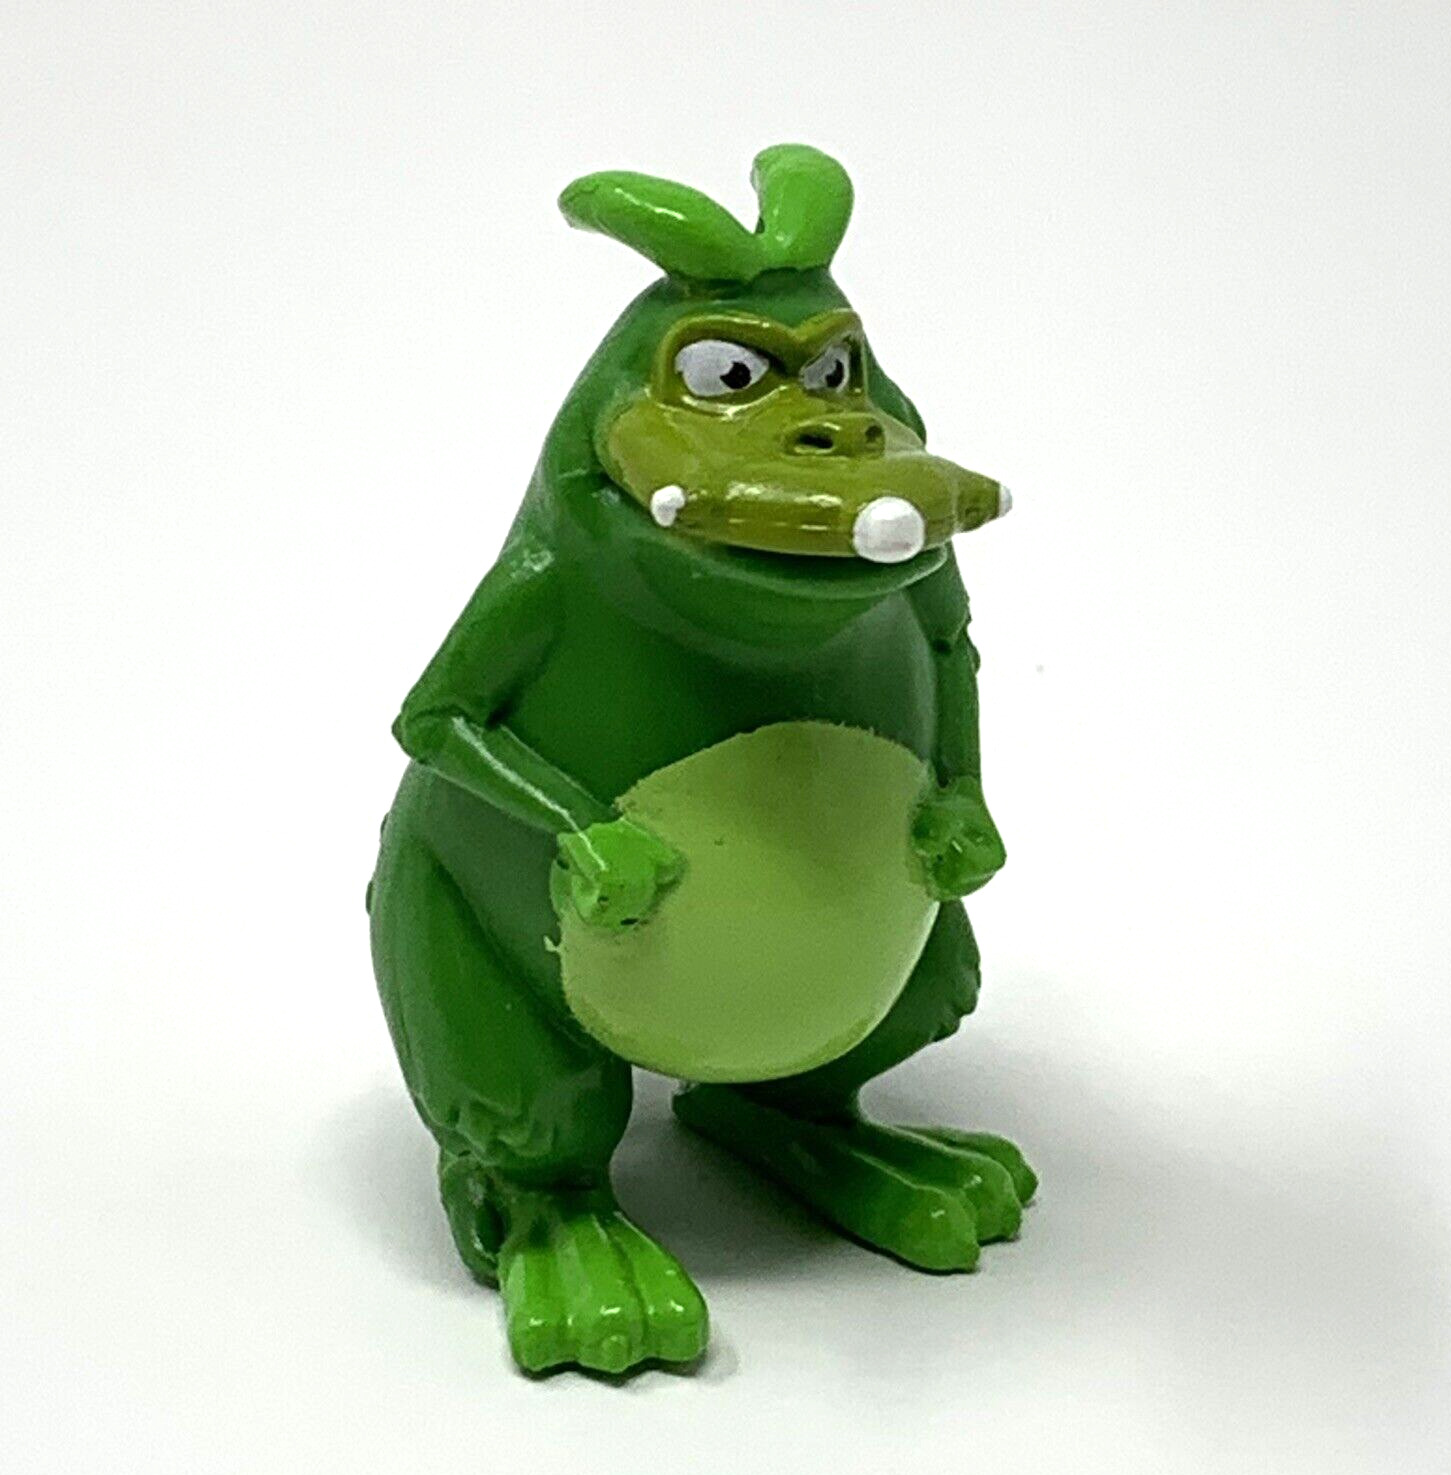 YOWIE CRAG The Mangrove Yowie Collectible Toy Figurine Wild Water Series Green